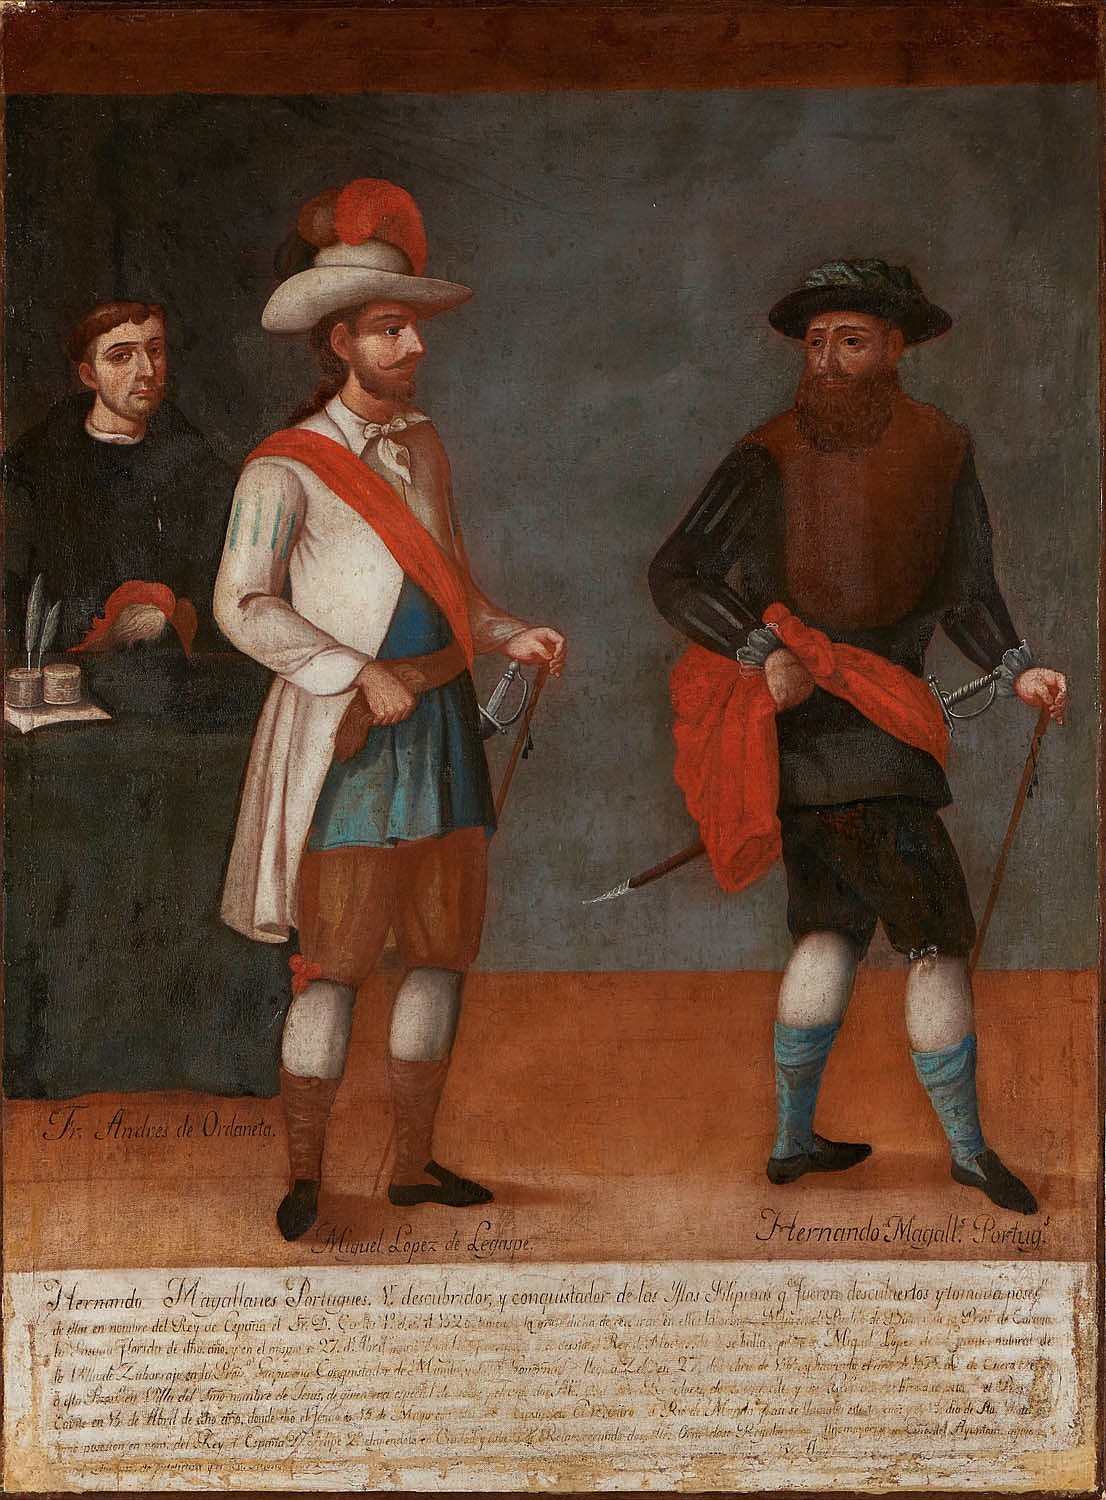 Painting of the three Founding Fathers of the Manila galleon trade route, from left: Fr. Andrés de Urdaneta who plotted the trade route across the Pacific, Miguel López Legazpi, the first Governor-General of Spanish East Indies (now the Philippines) and Hernando Magellan who opened up the Philippines to Spain with his round-the-world expedition.